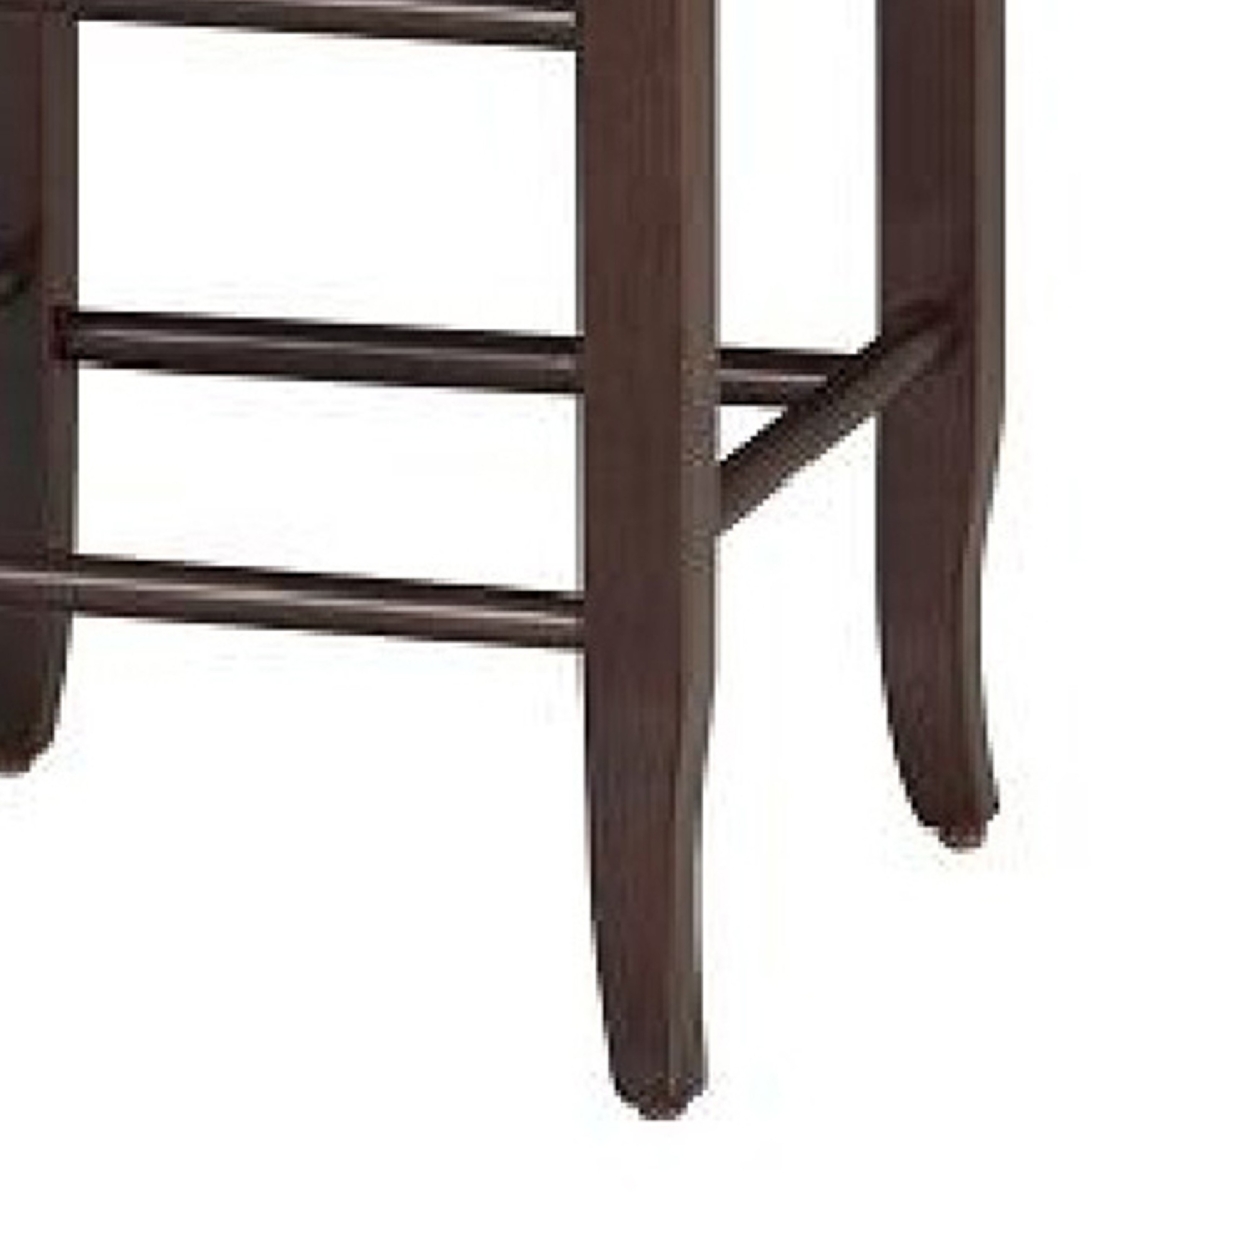 Rush Woven Wooden Frame Counter Stool With Saber Legs, Beige And Dark Brown- Saltoro Sherpi